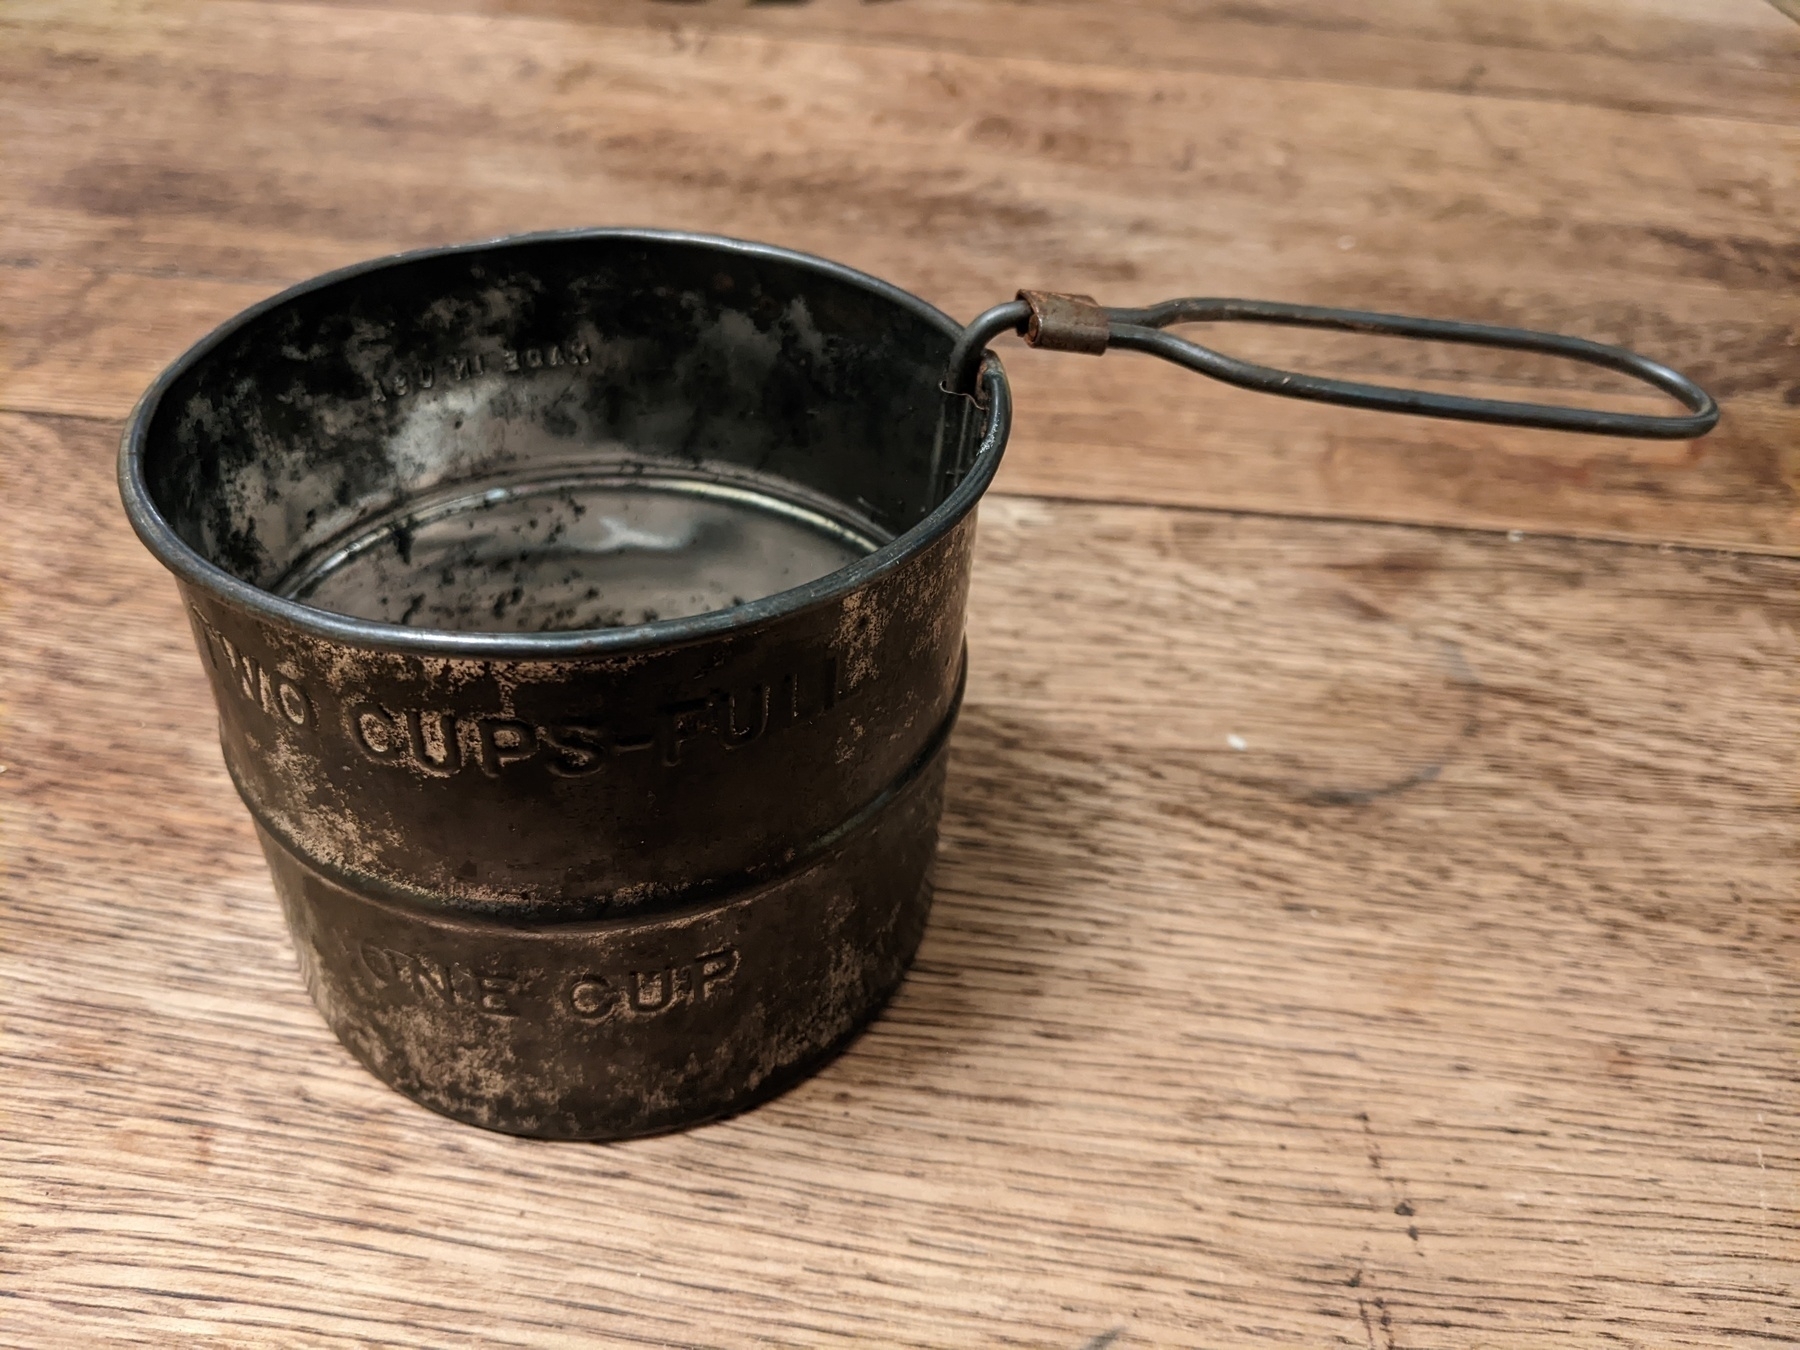 side view of vintage sifter showing one cup and two cup marks